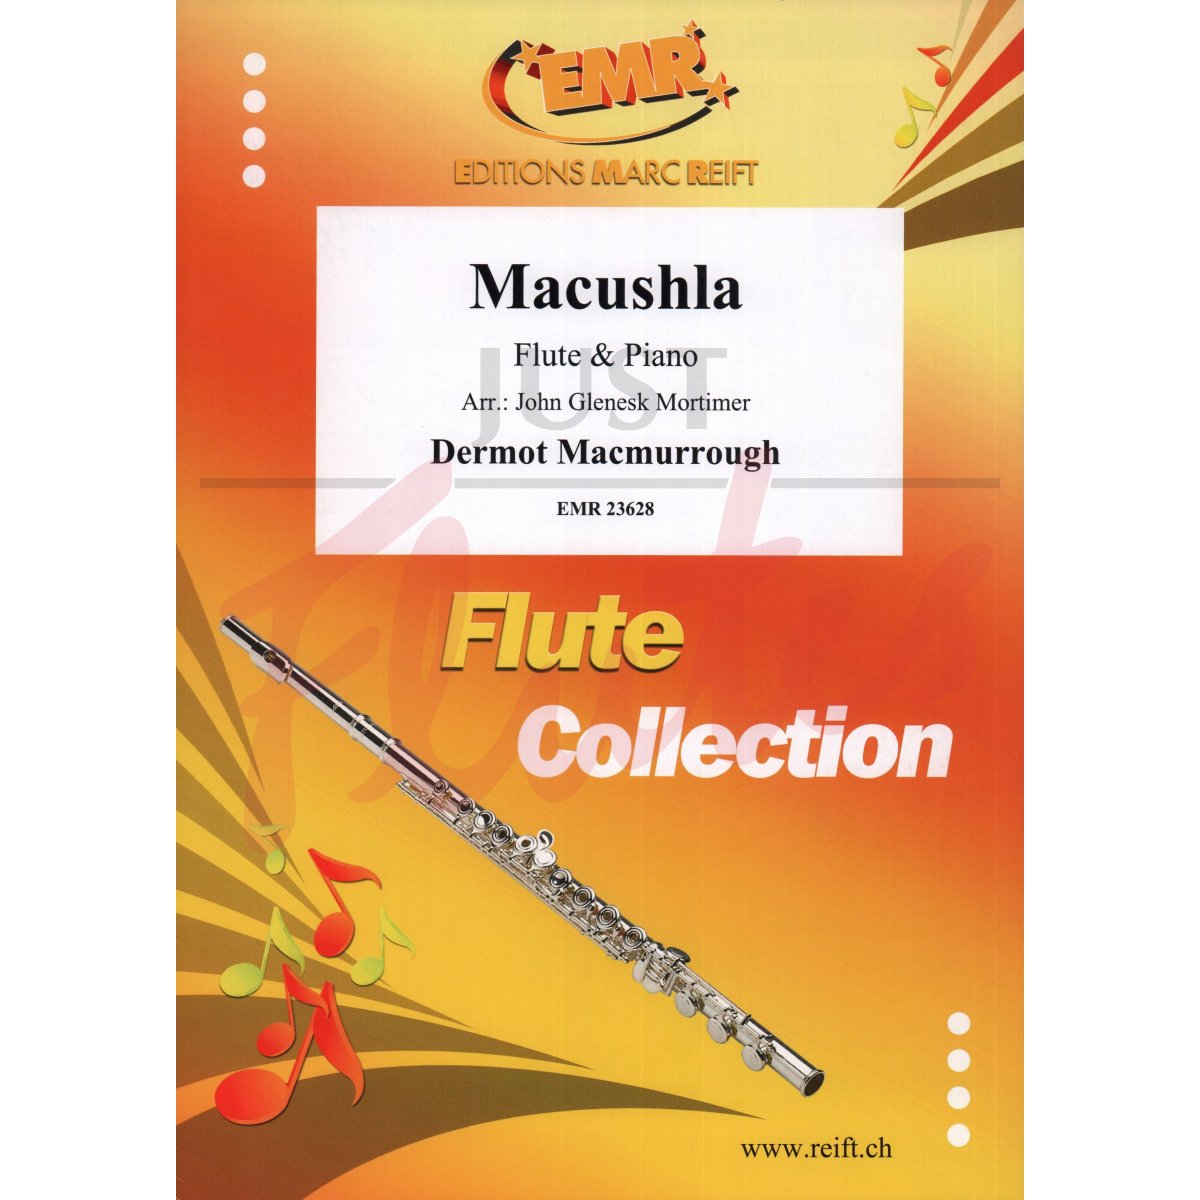 Macushla for Flute and Piano